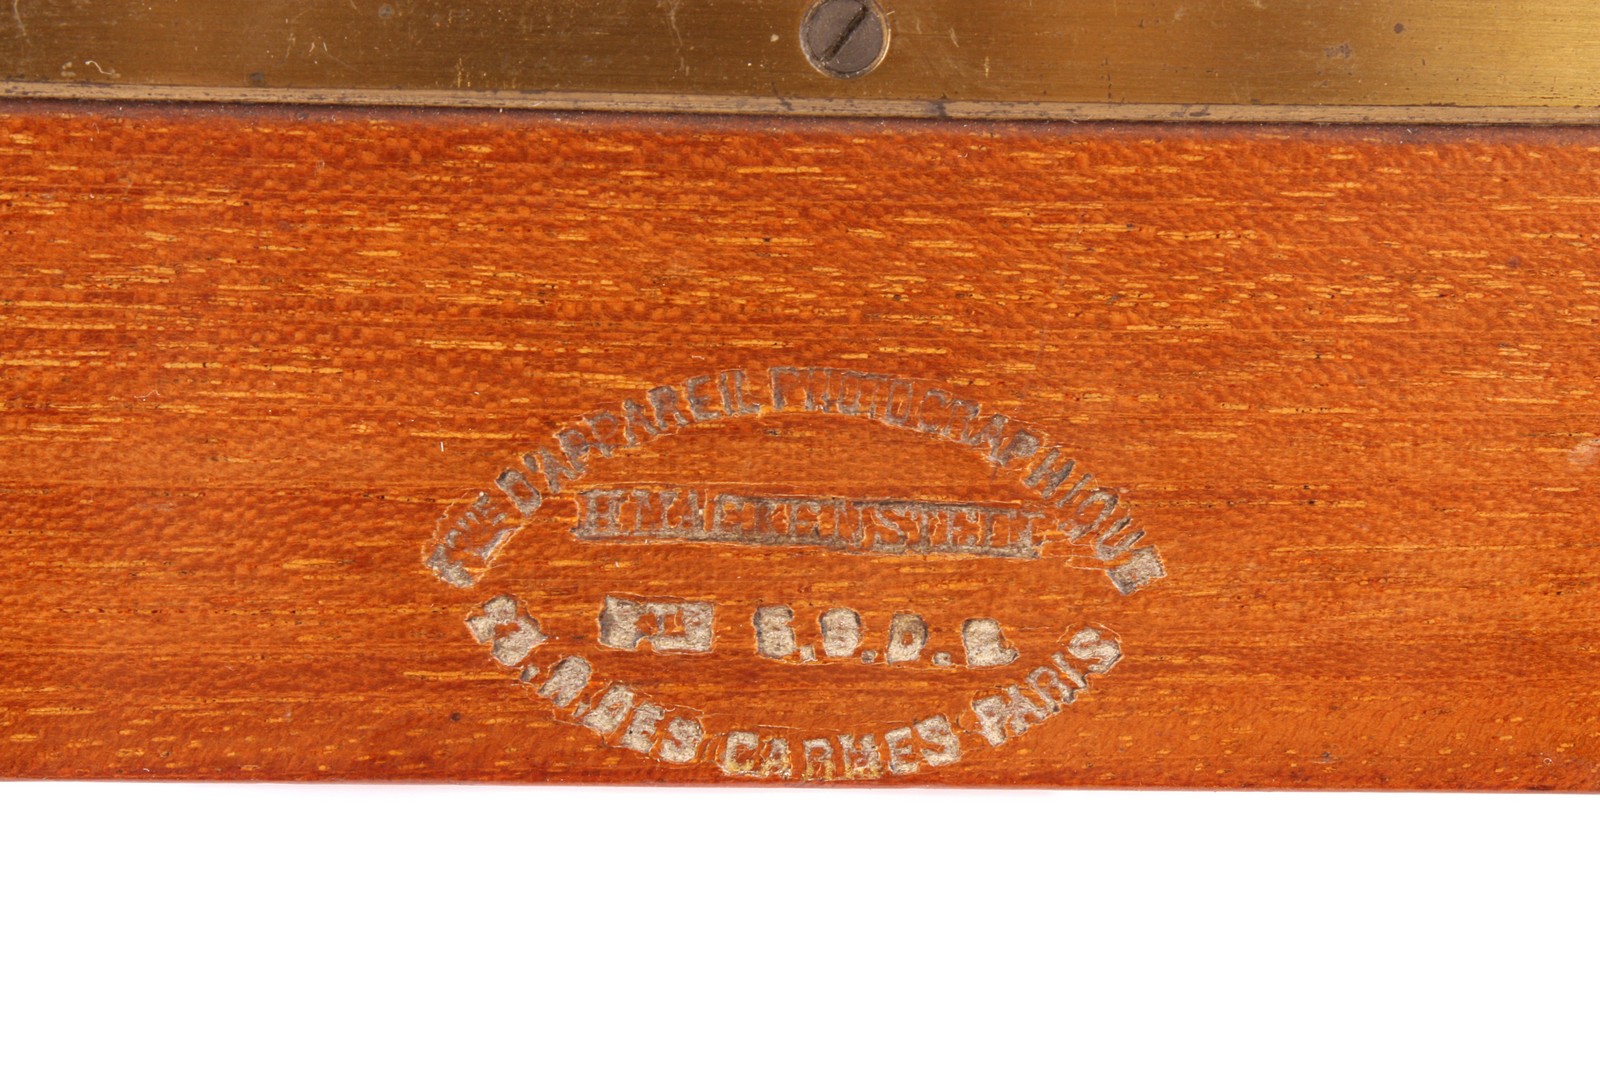 A H. Mackenstein Mahogany Stereo Tailboard Camera, with horizontal and vertical mounting back, 6x8”, - Image 3 of 5